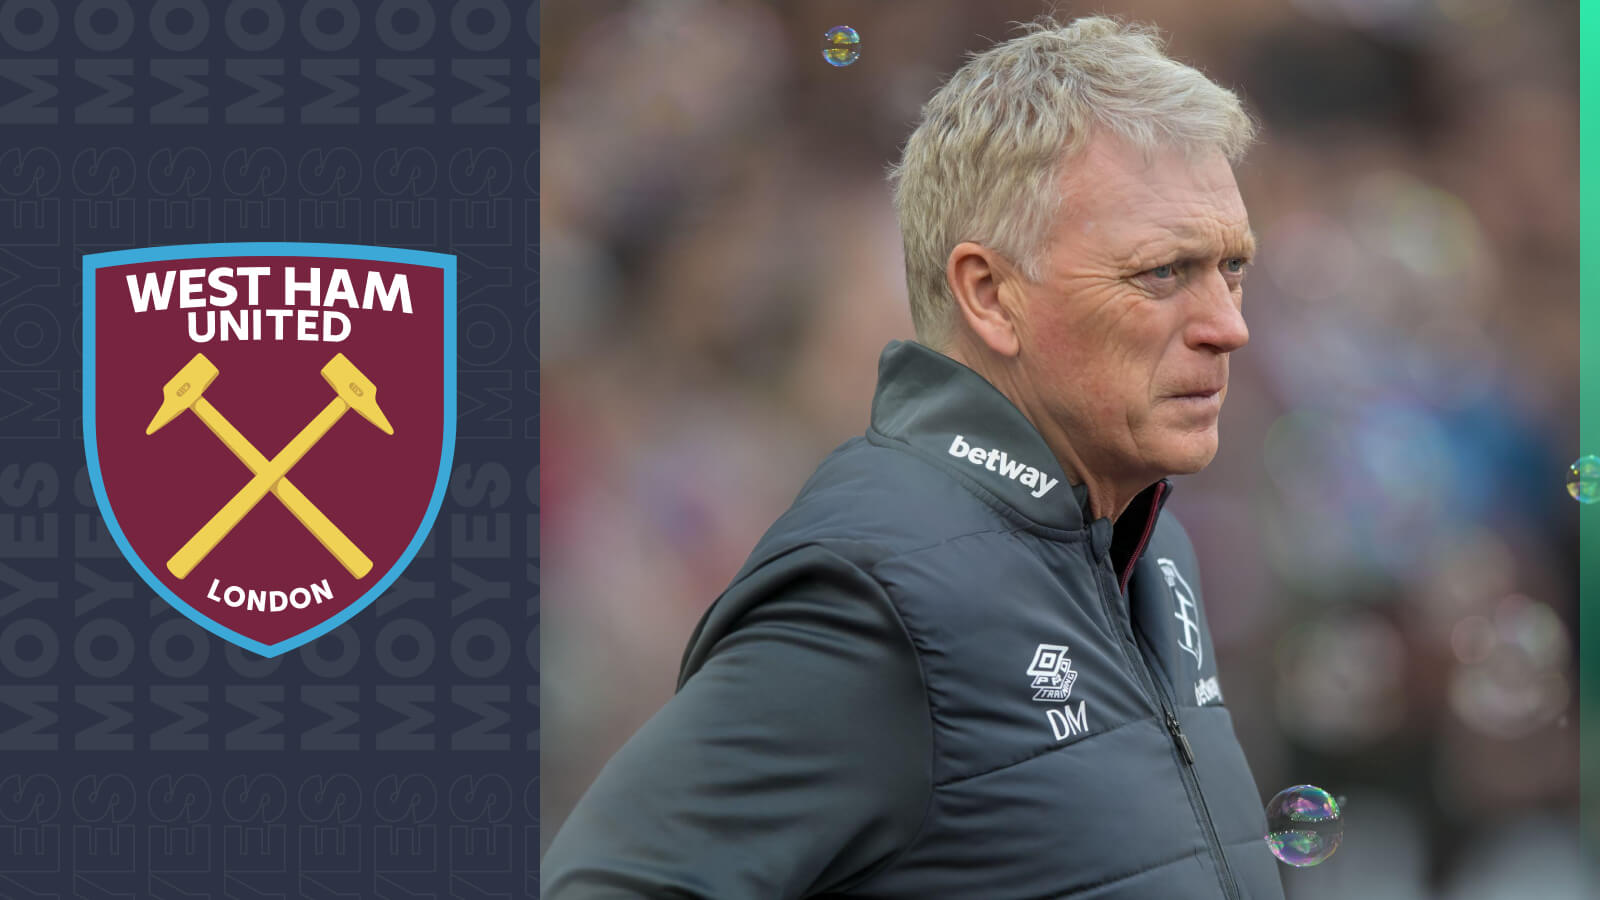 Manager confirms he has been offered new contract at West Ham